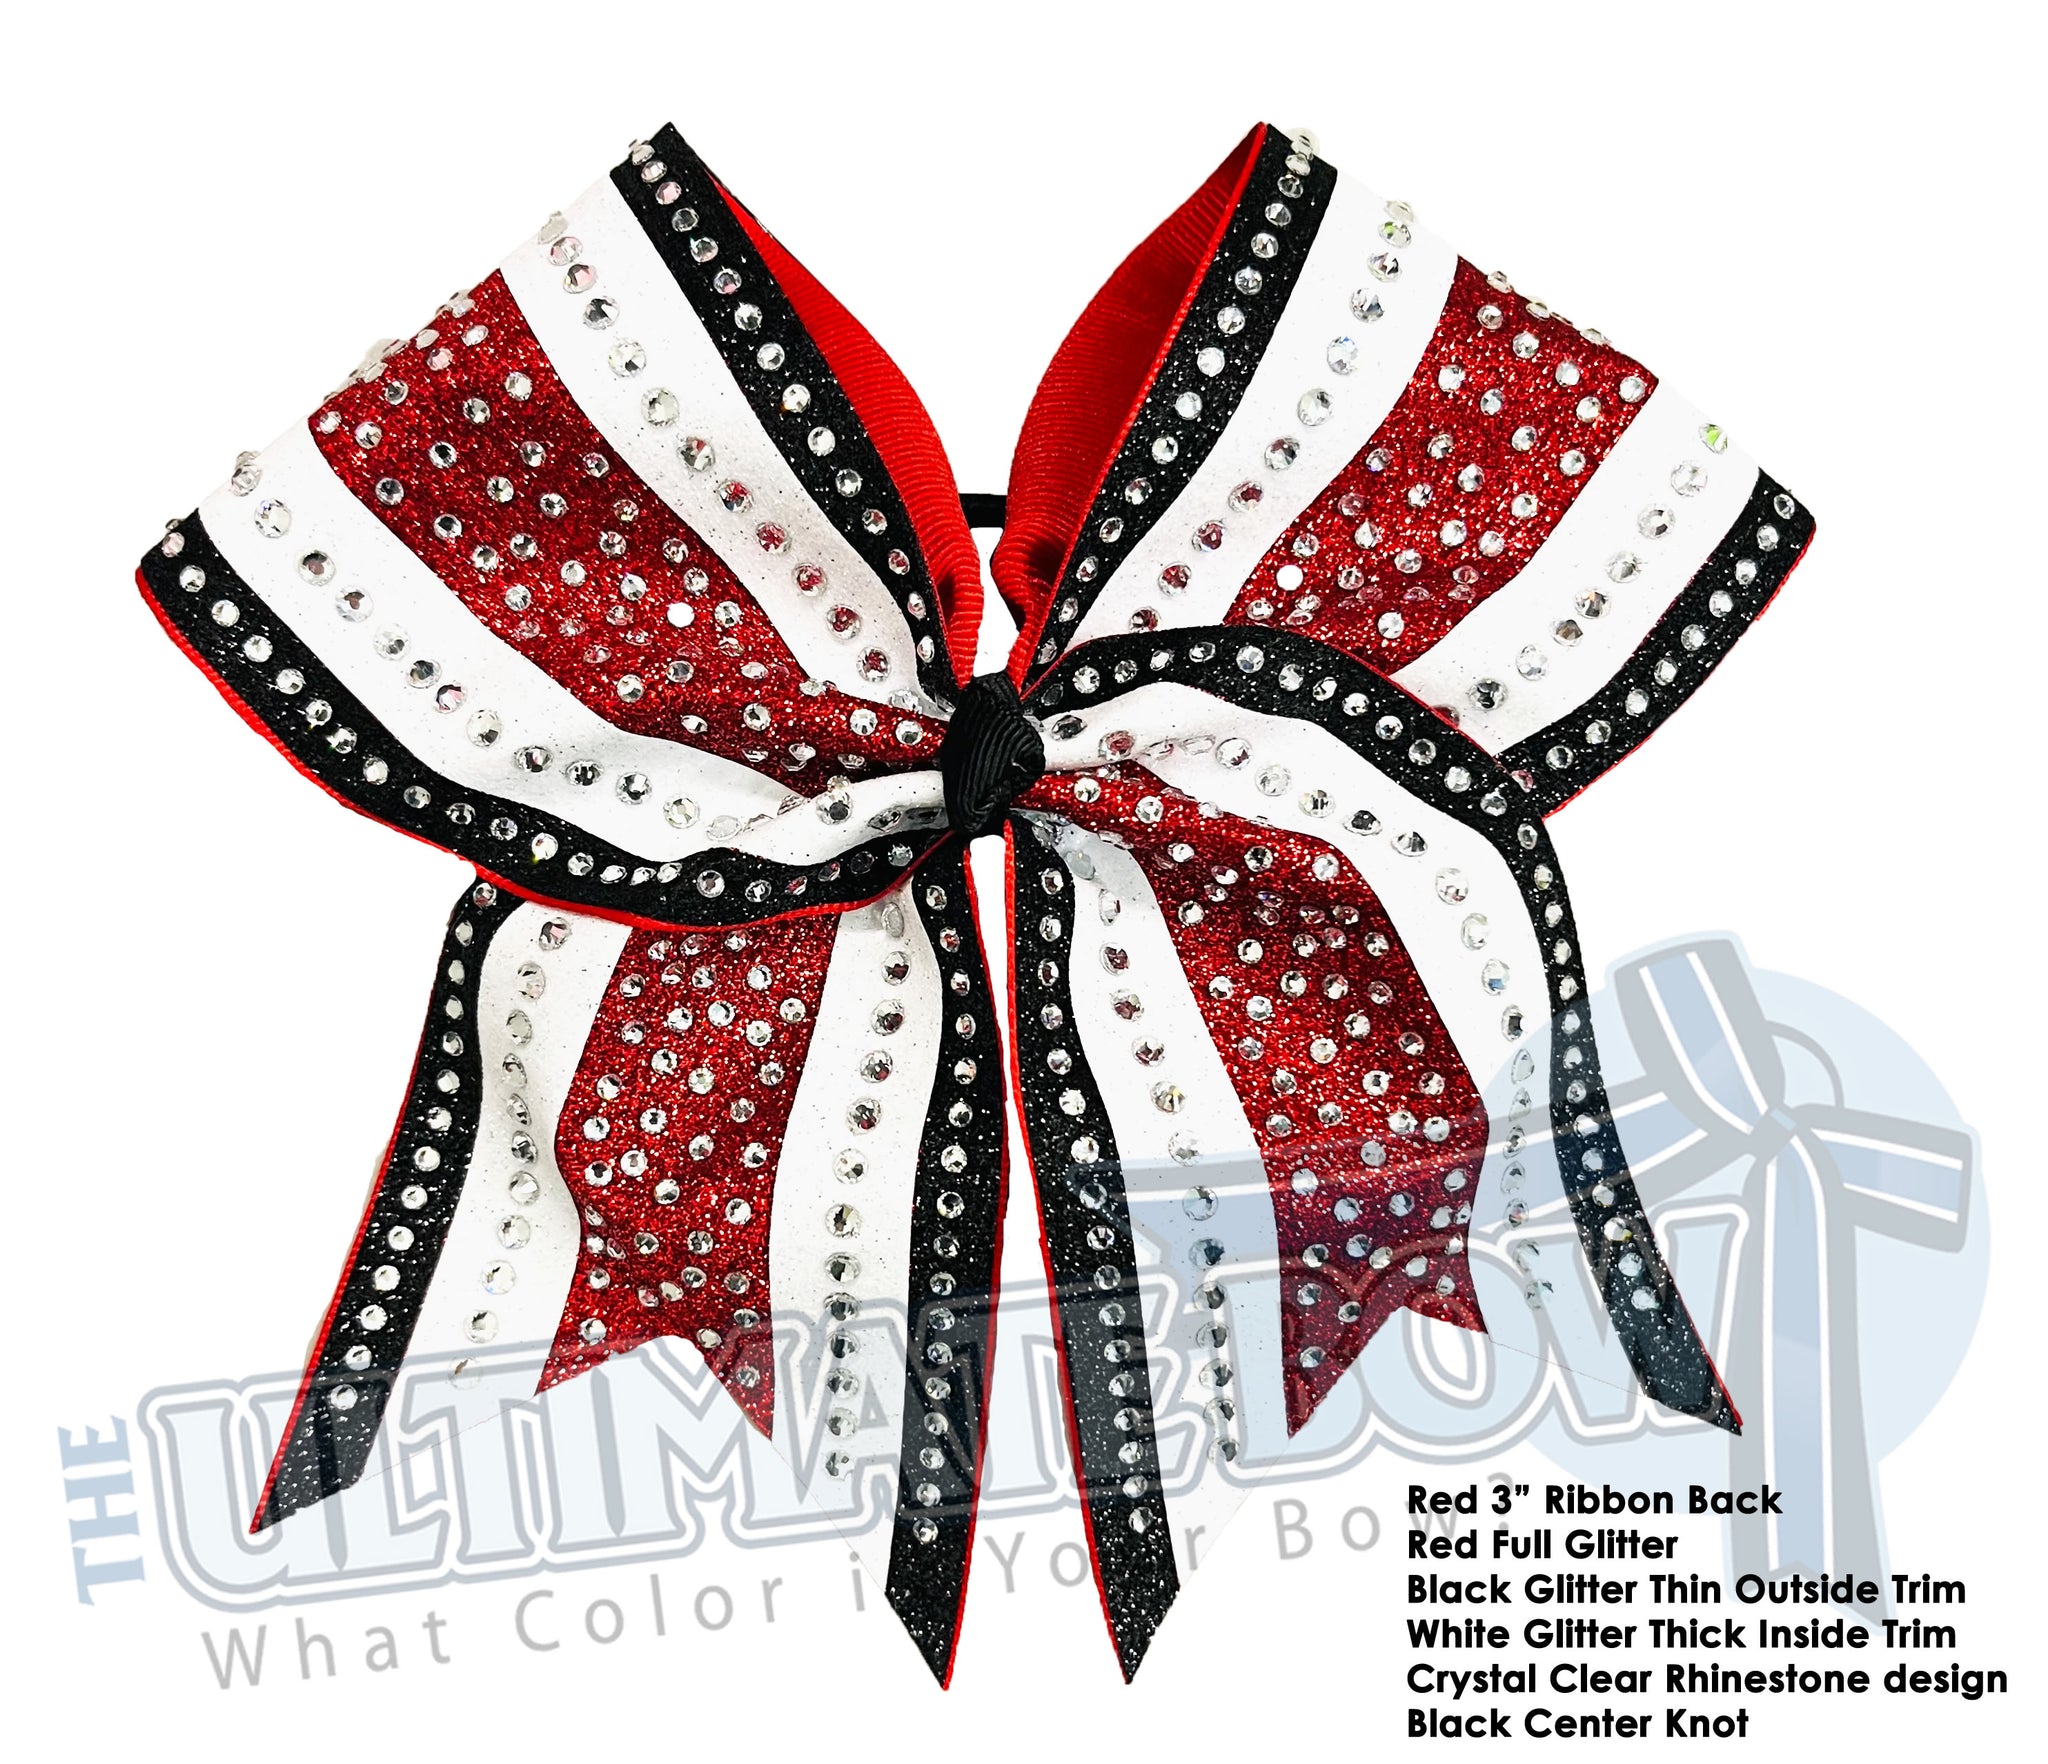 Red, White and Black Rhinestone and Glitter Cheer Bow | Regal Glam Rhinestone Glitter Cheer Bow | Cheer Competition Bows